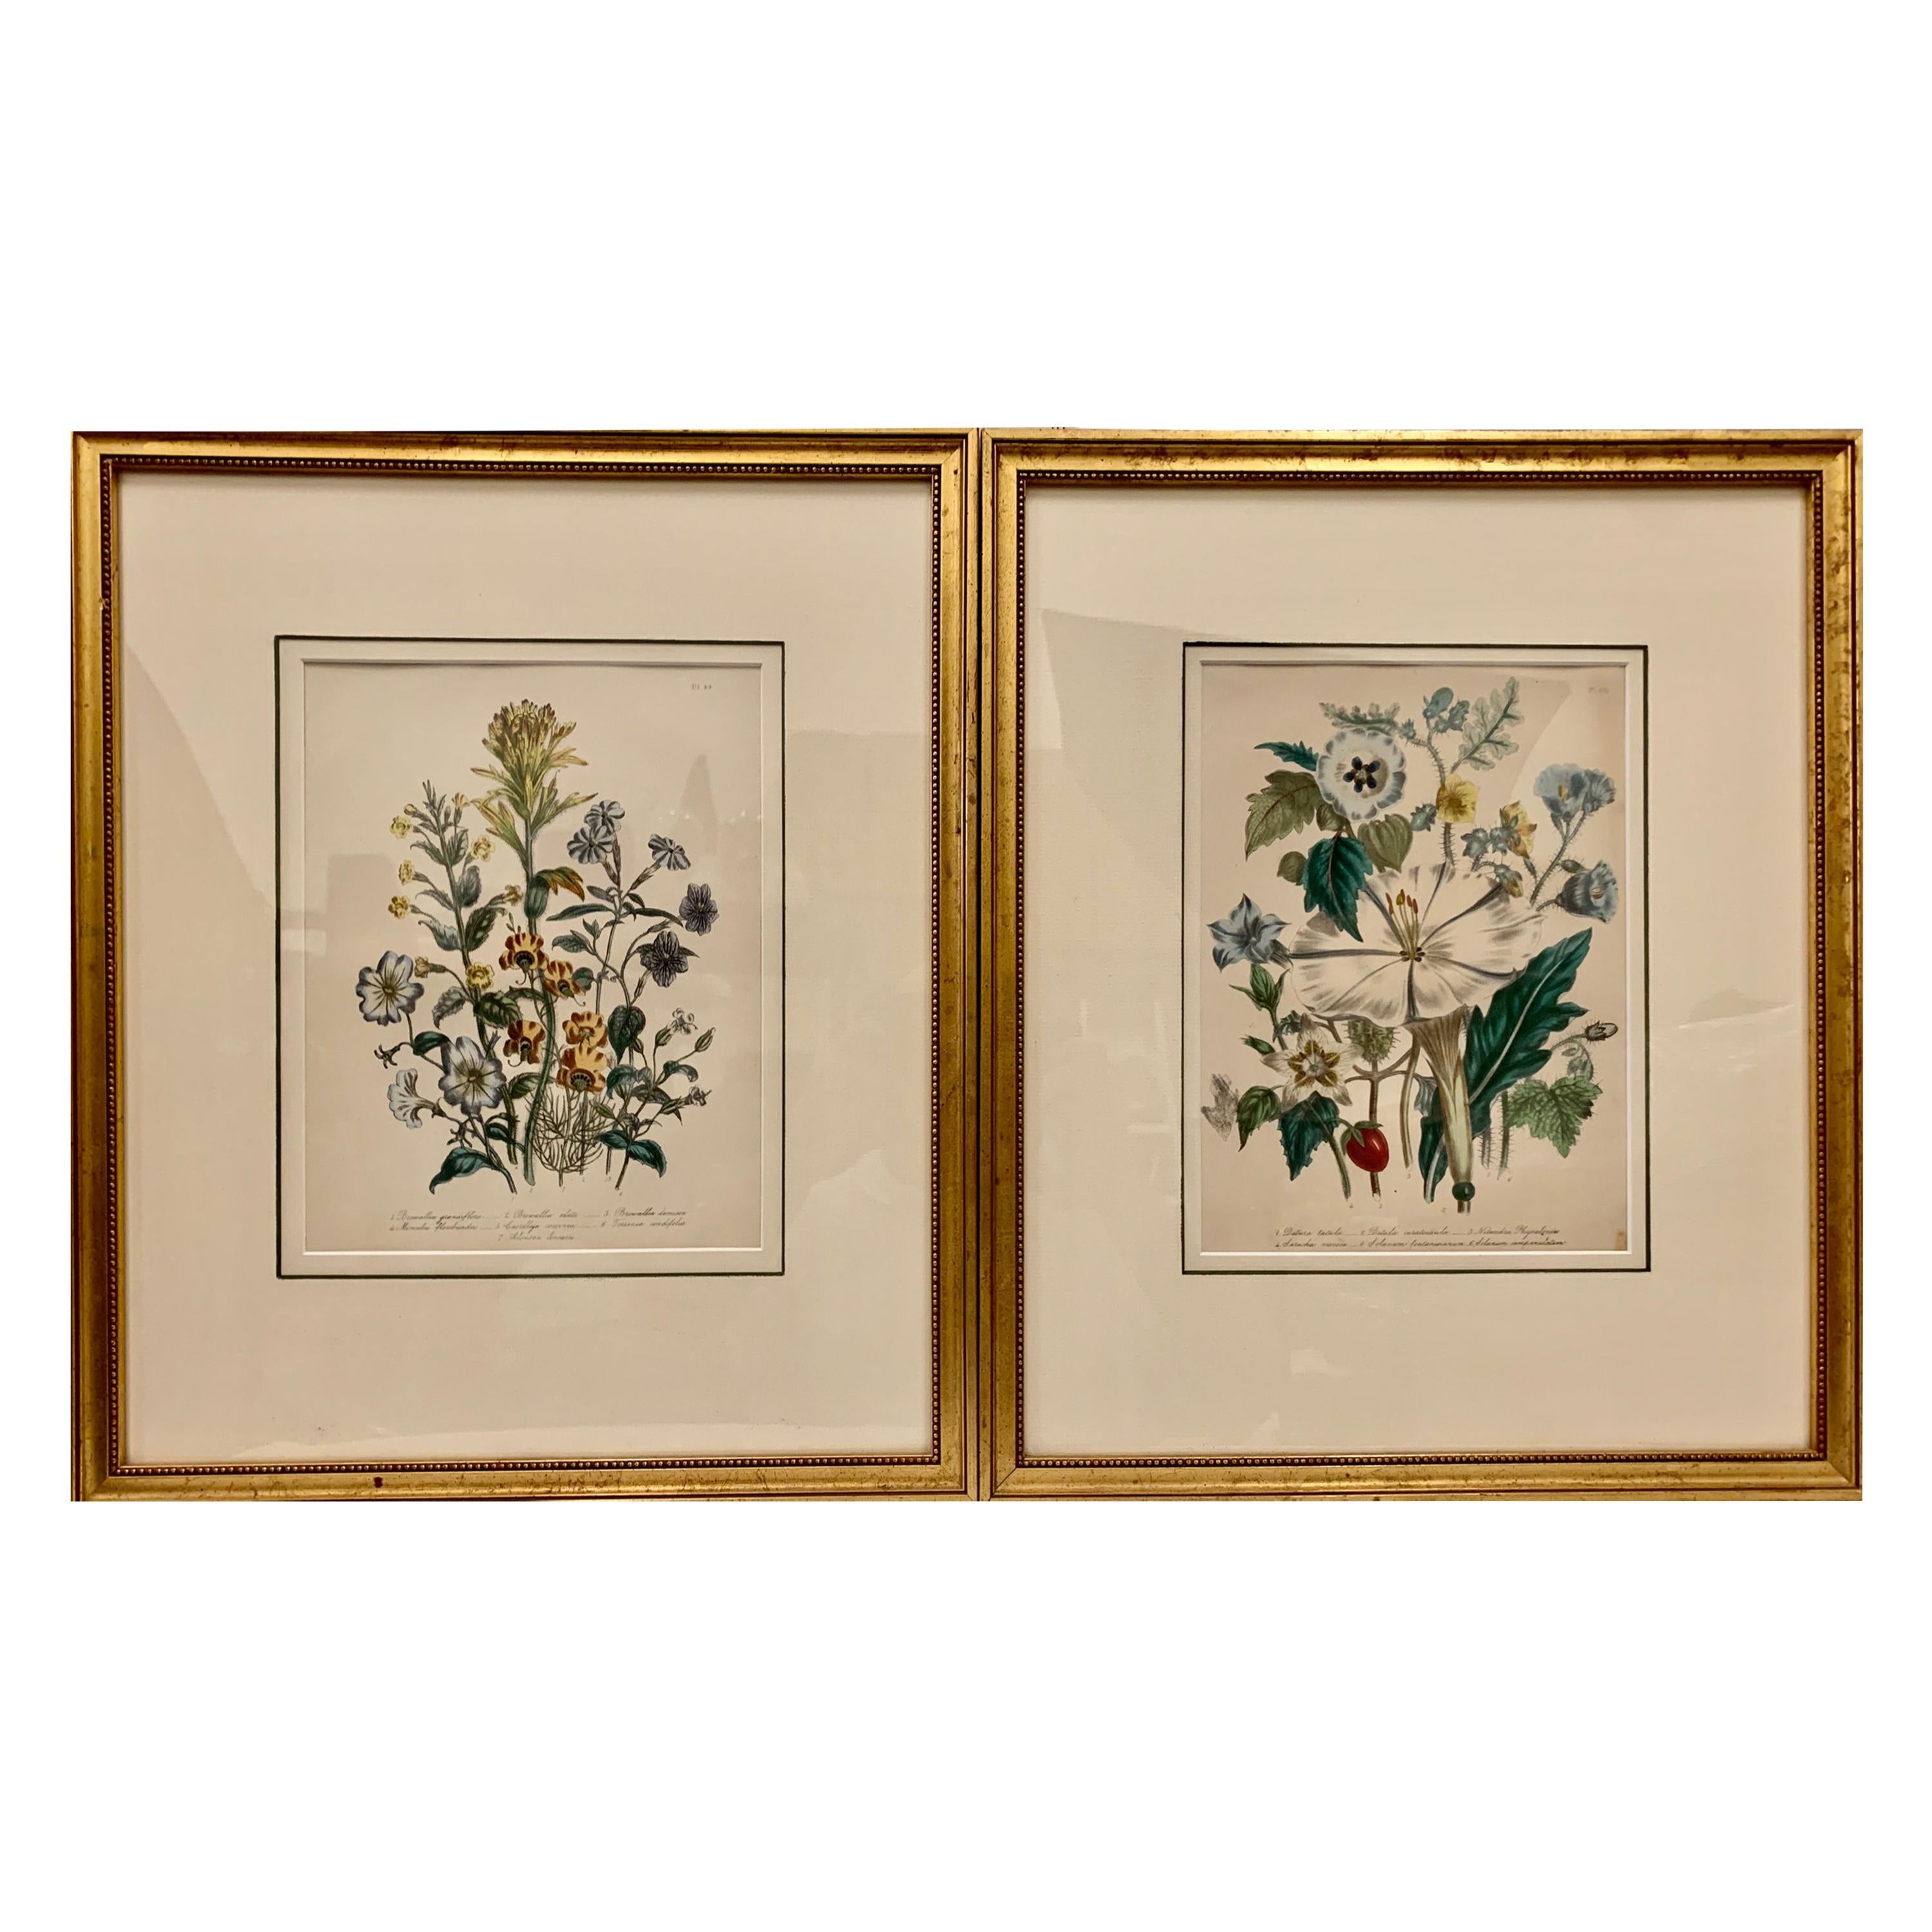  Pair of 19th Century Botanical Prints by Mrs. Loudon